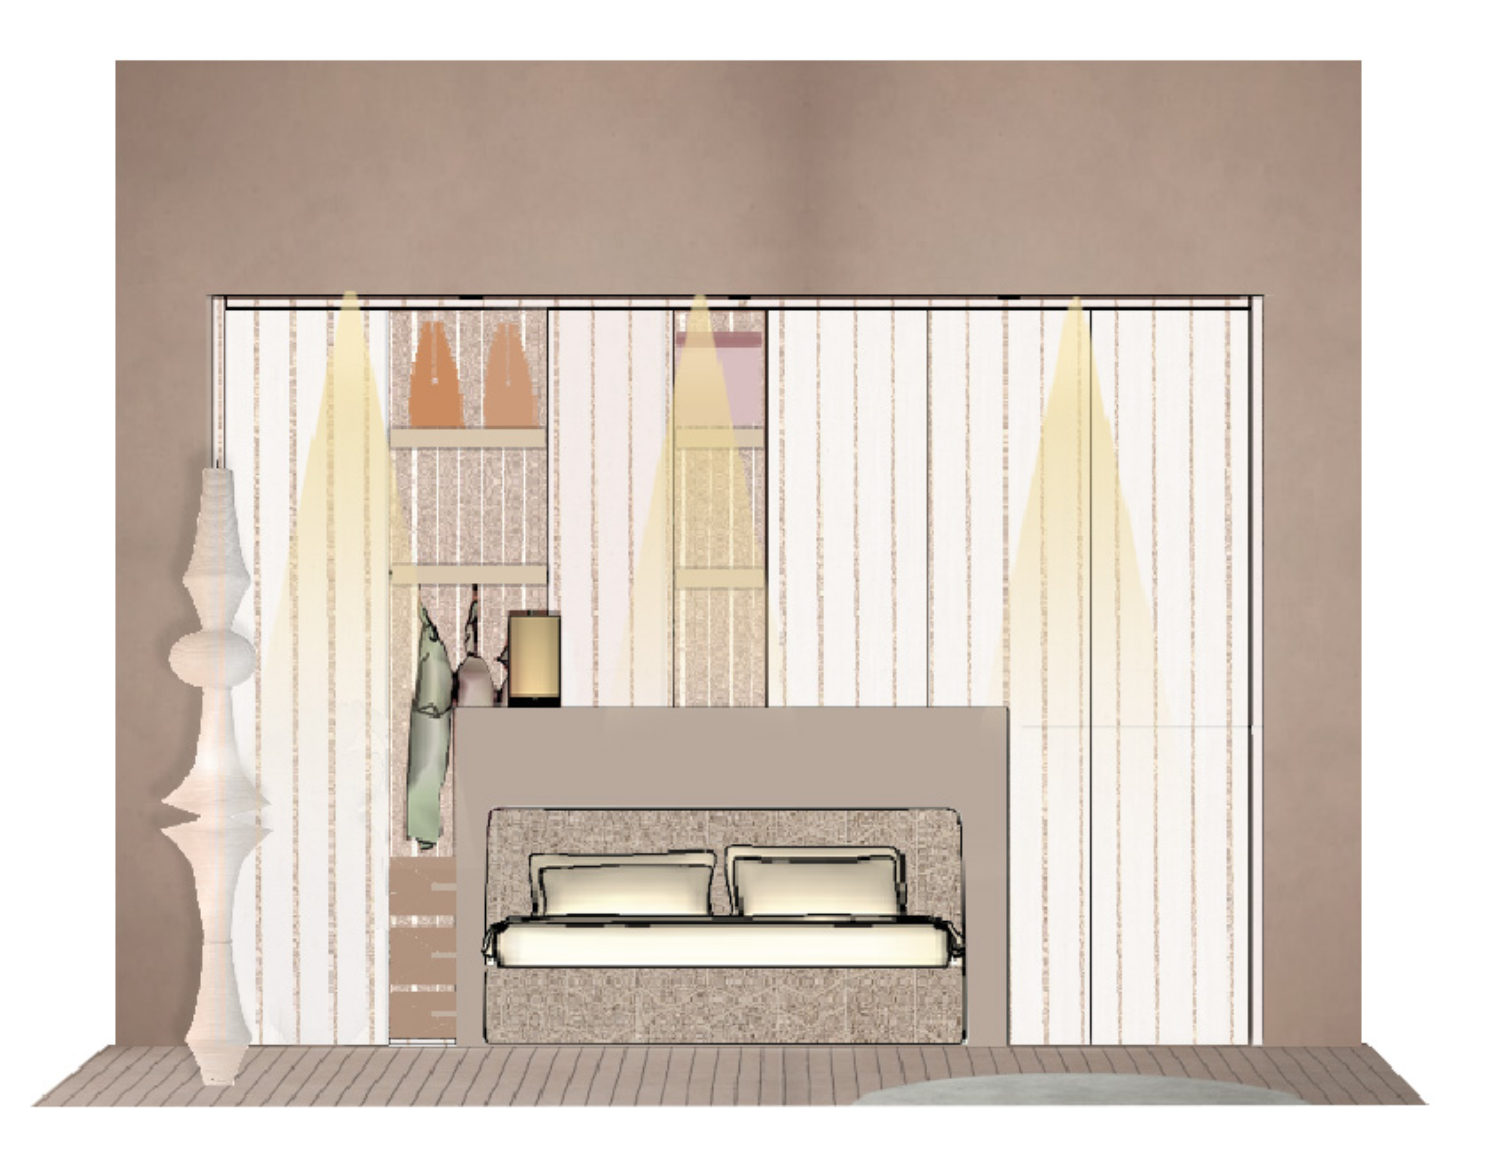 View of a wardrobe project in a bedroom.